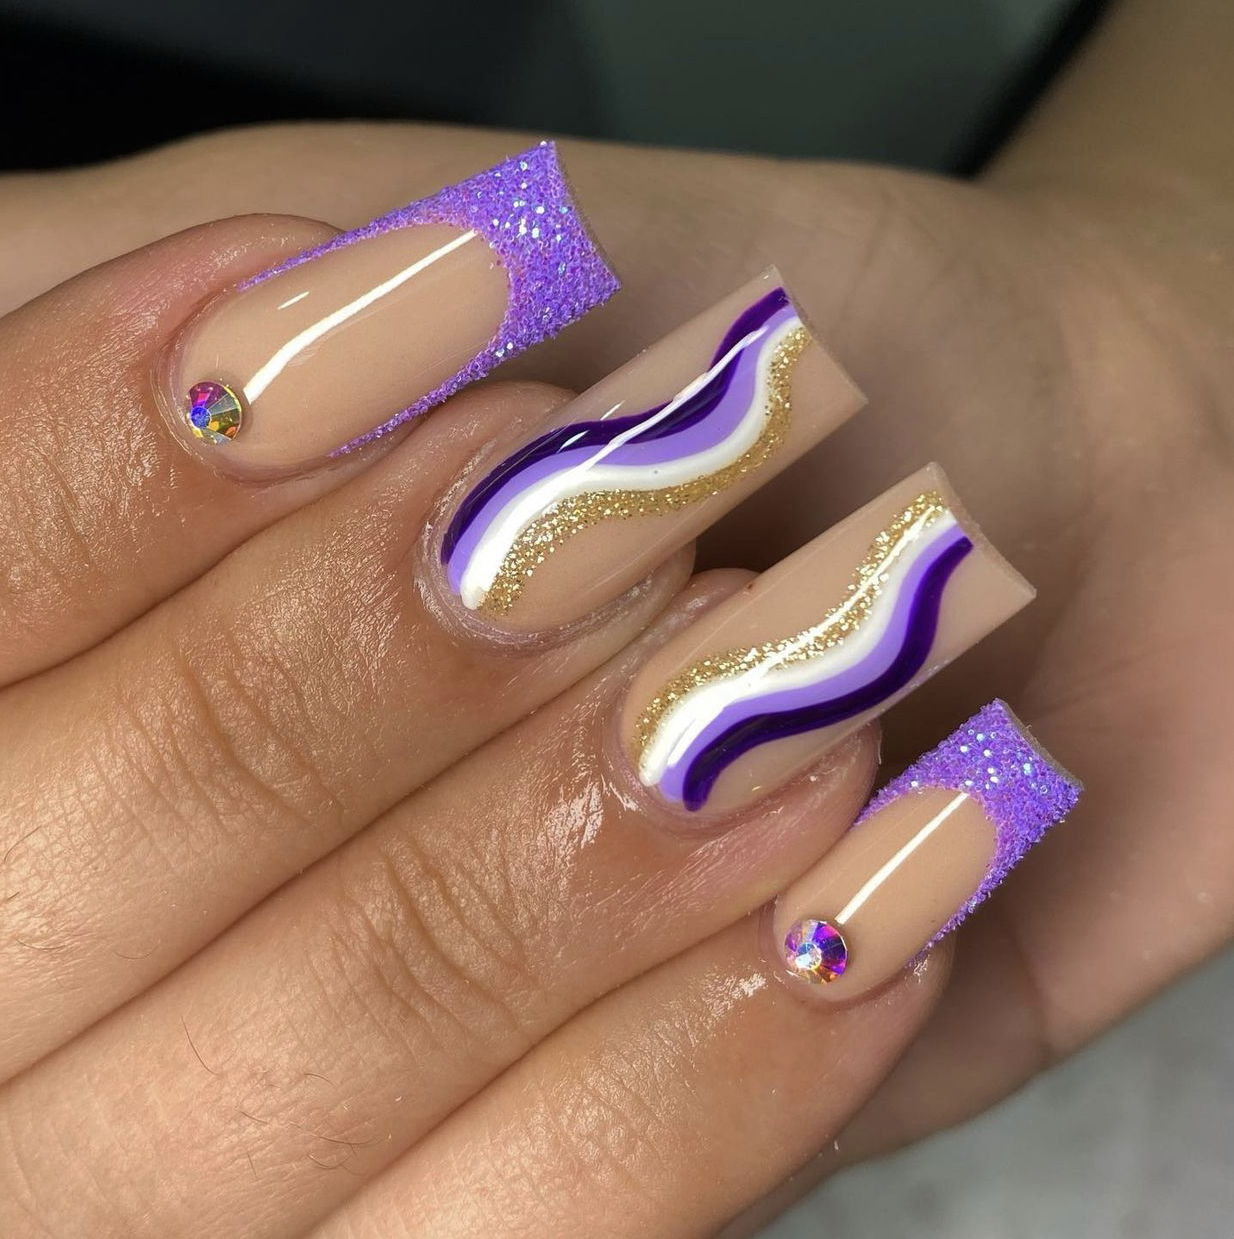 Nude Nails With Purple And Glitter Designs